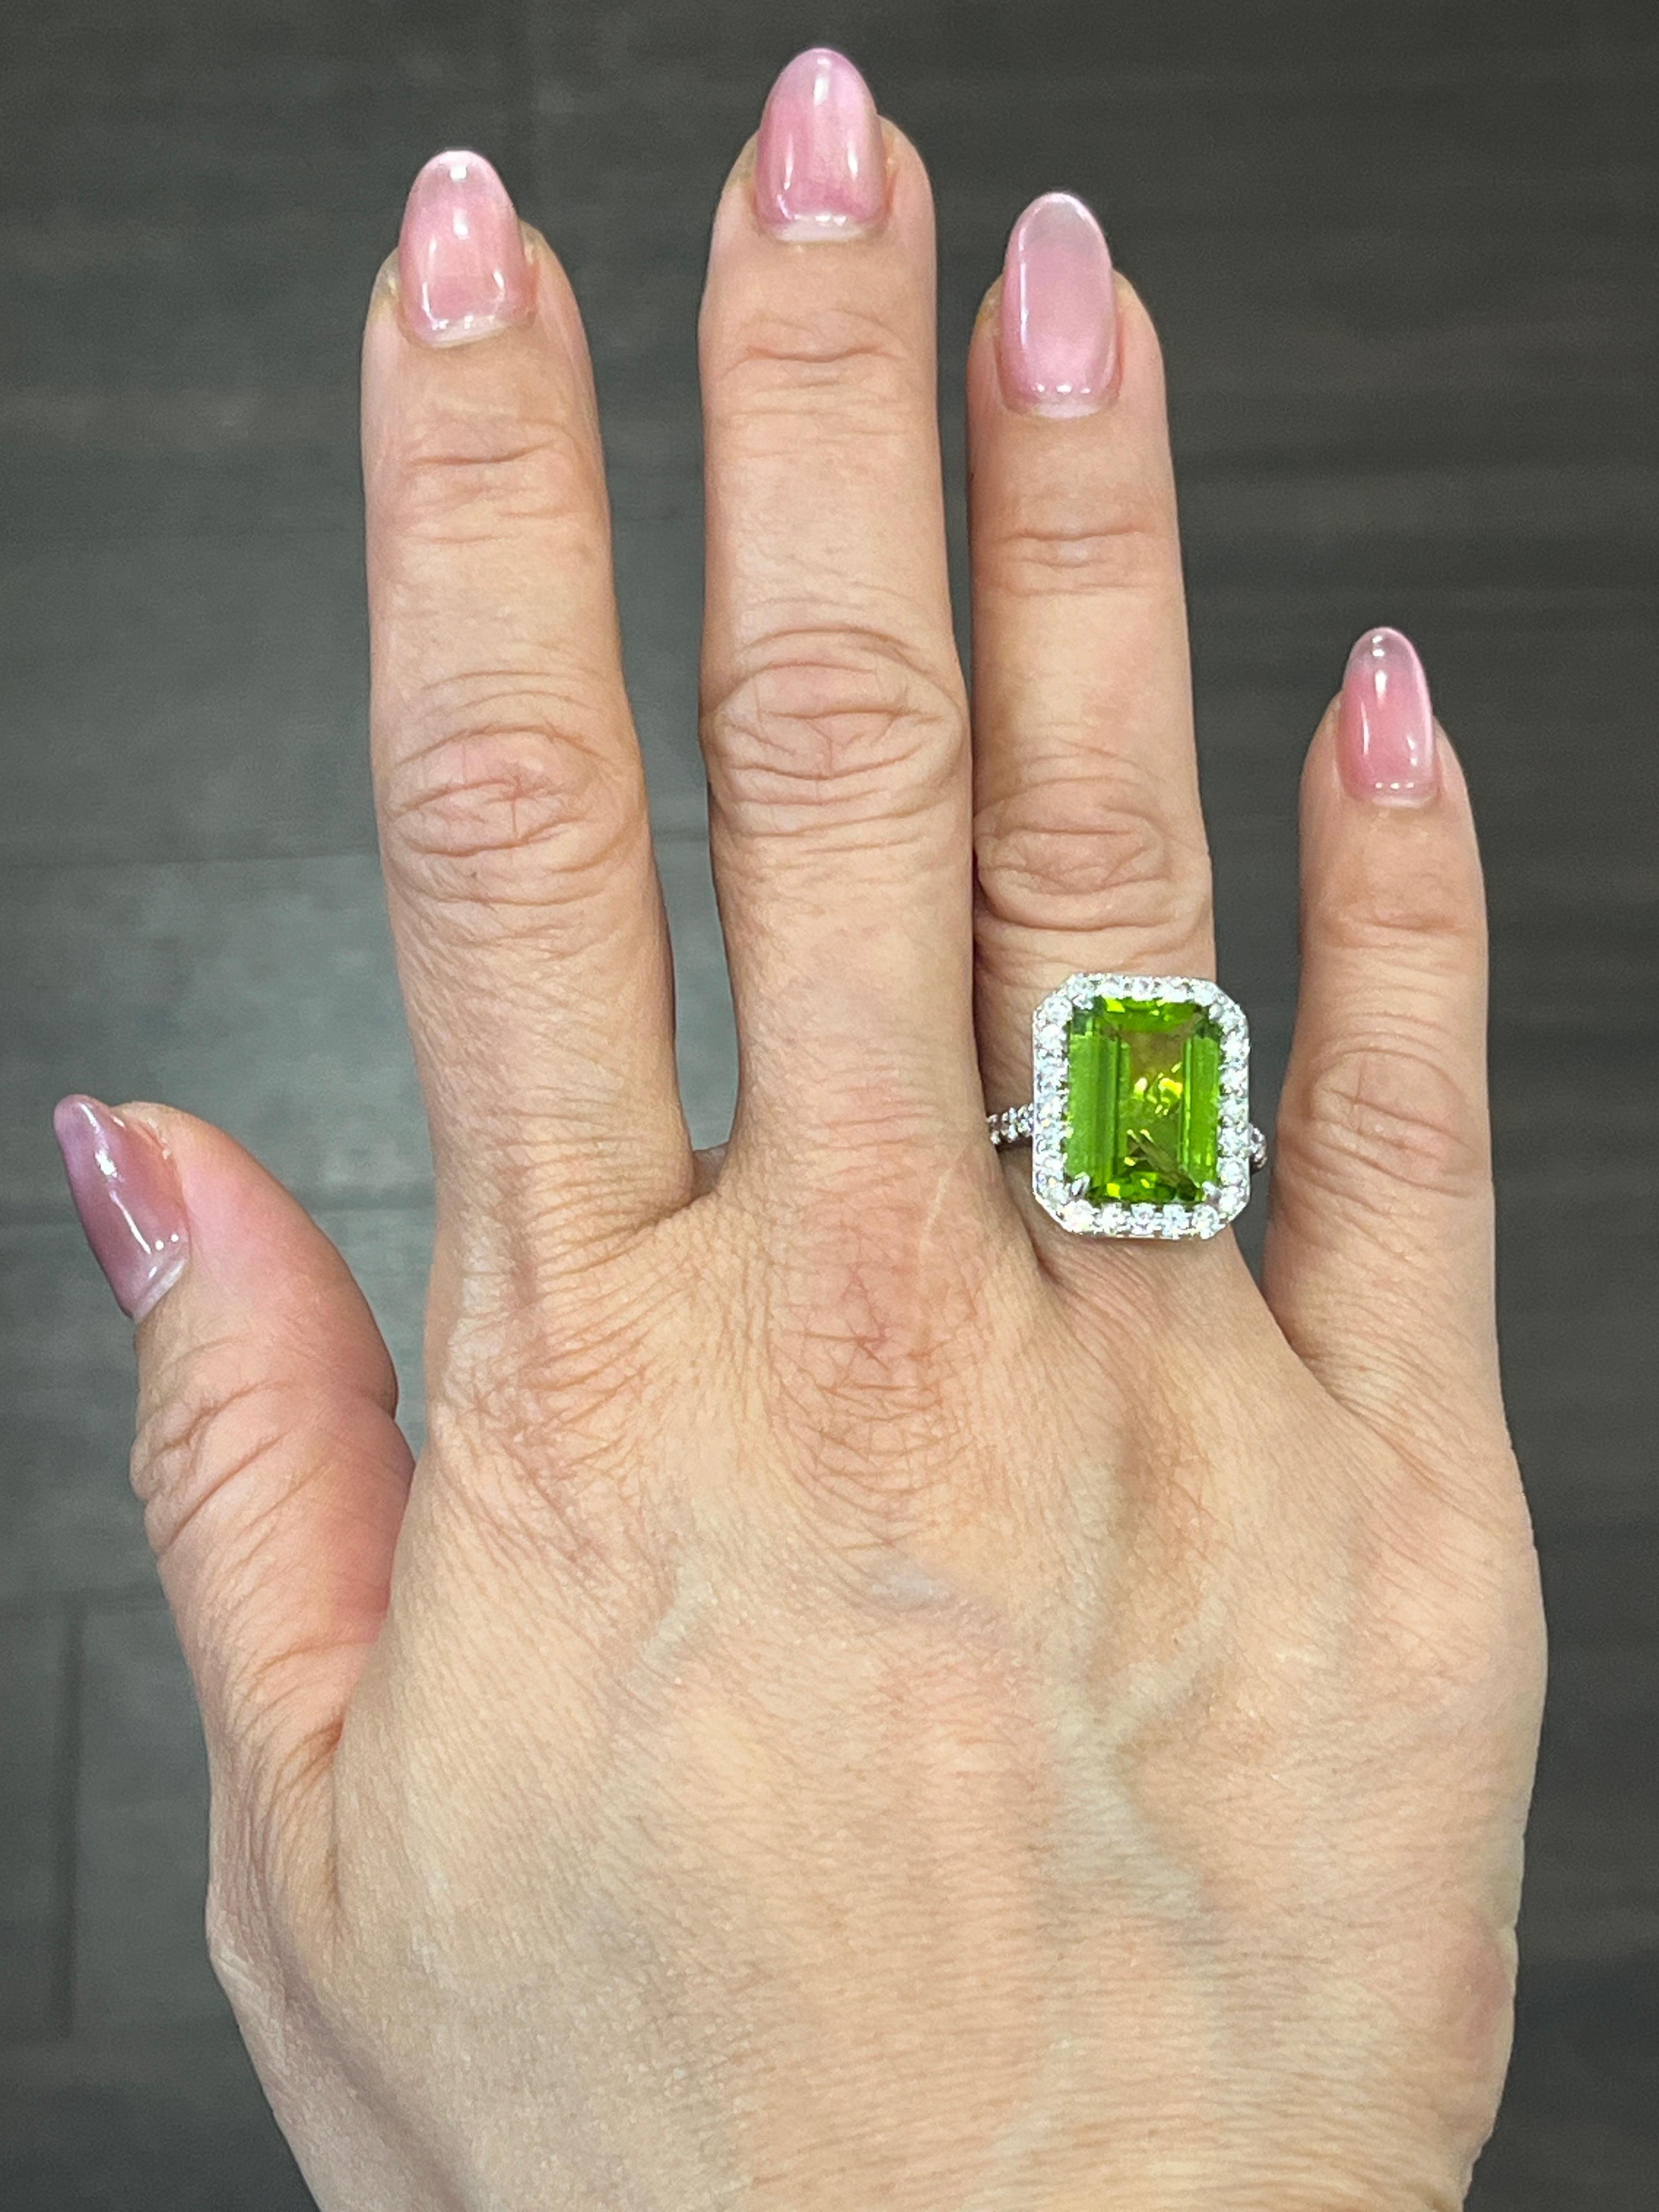 This gorgeous 18k white gold ring is set with an emerald cut natural green peridot weighing 6.67 ct. The emerald cut natural green peridot is surrounded with 36 round diamonds with a carat weight of 1.06. The diamonds boast a color of F/G and a